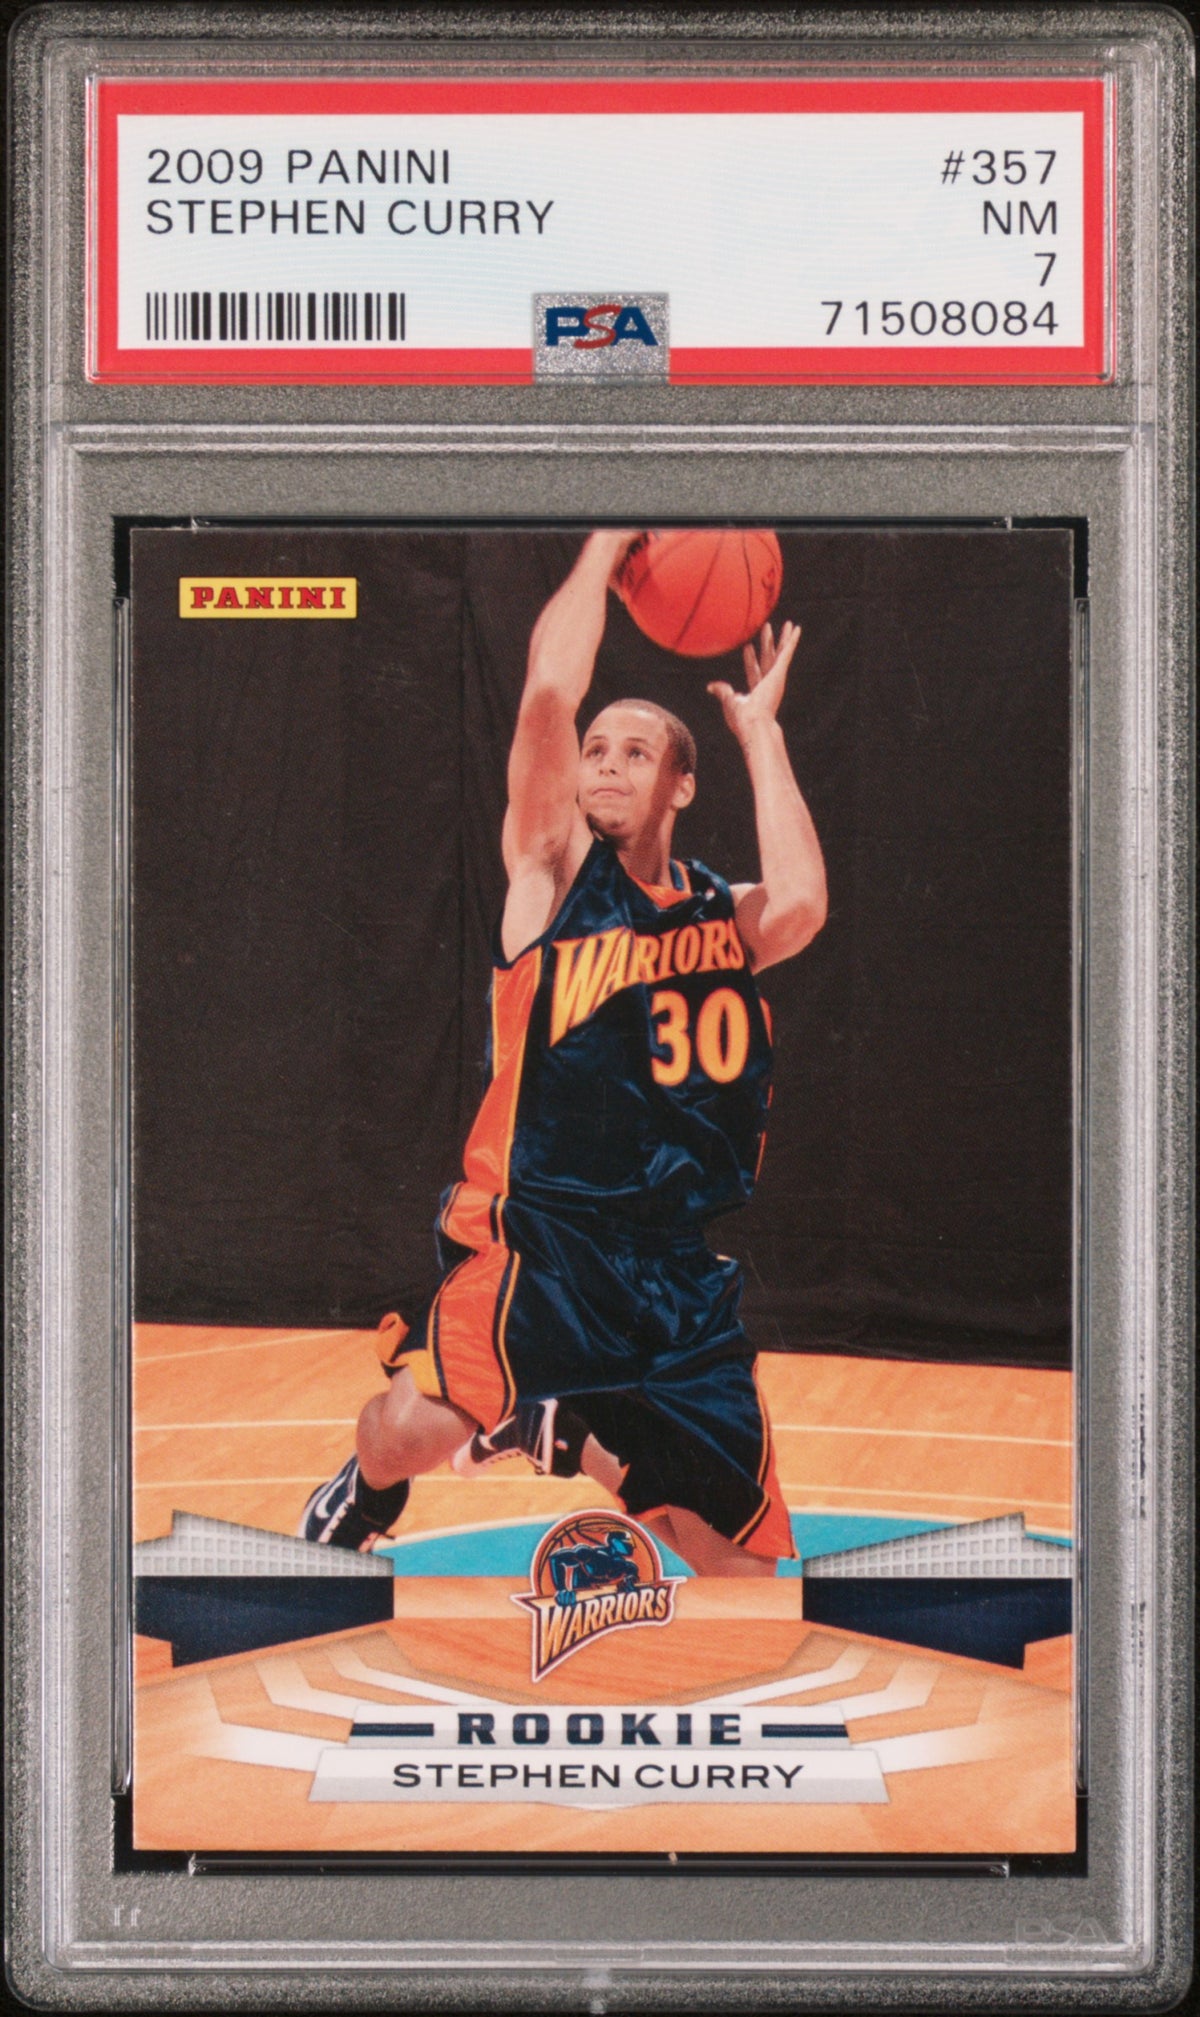 Stephen Curry 2009 Panini Basketball Rookie Card RC #357 Graded PSA 7